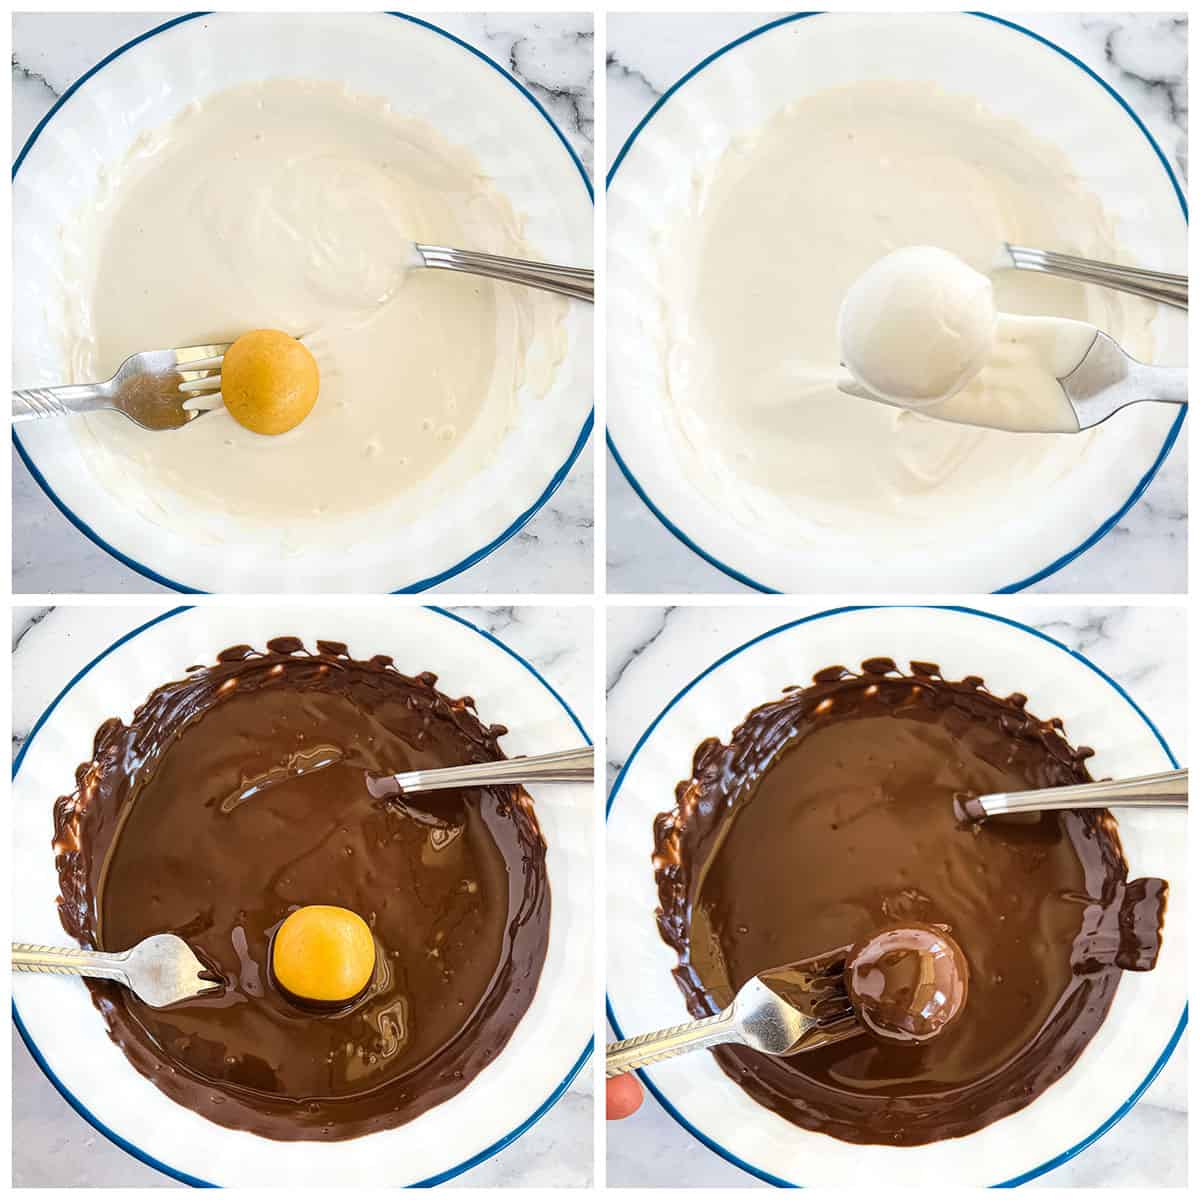 Next, using a fork, dip the lemon Oreo balls into melted chocolate one at a time, ensuring they have a nice coat of chocolate. 